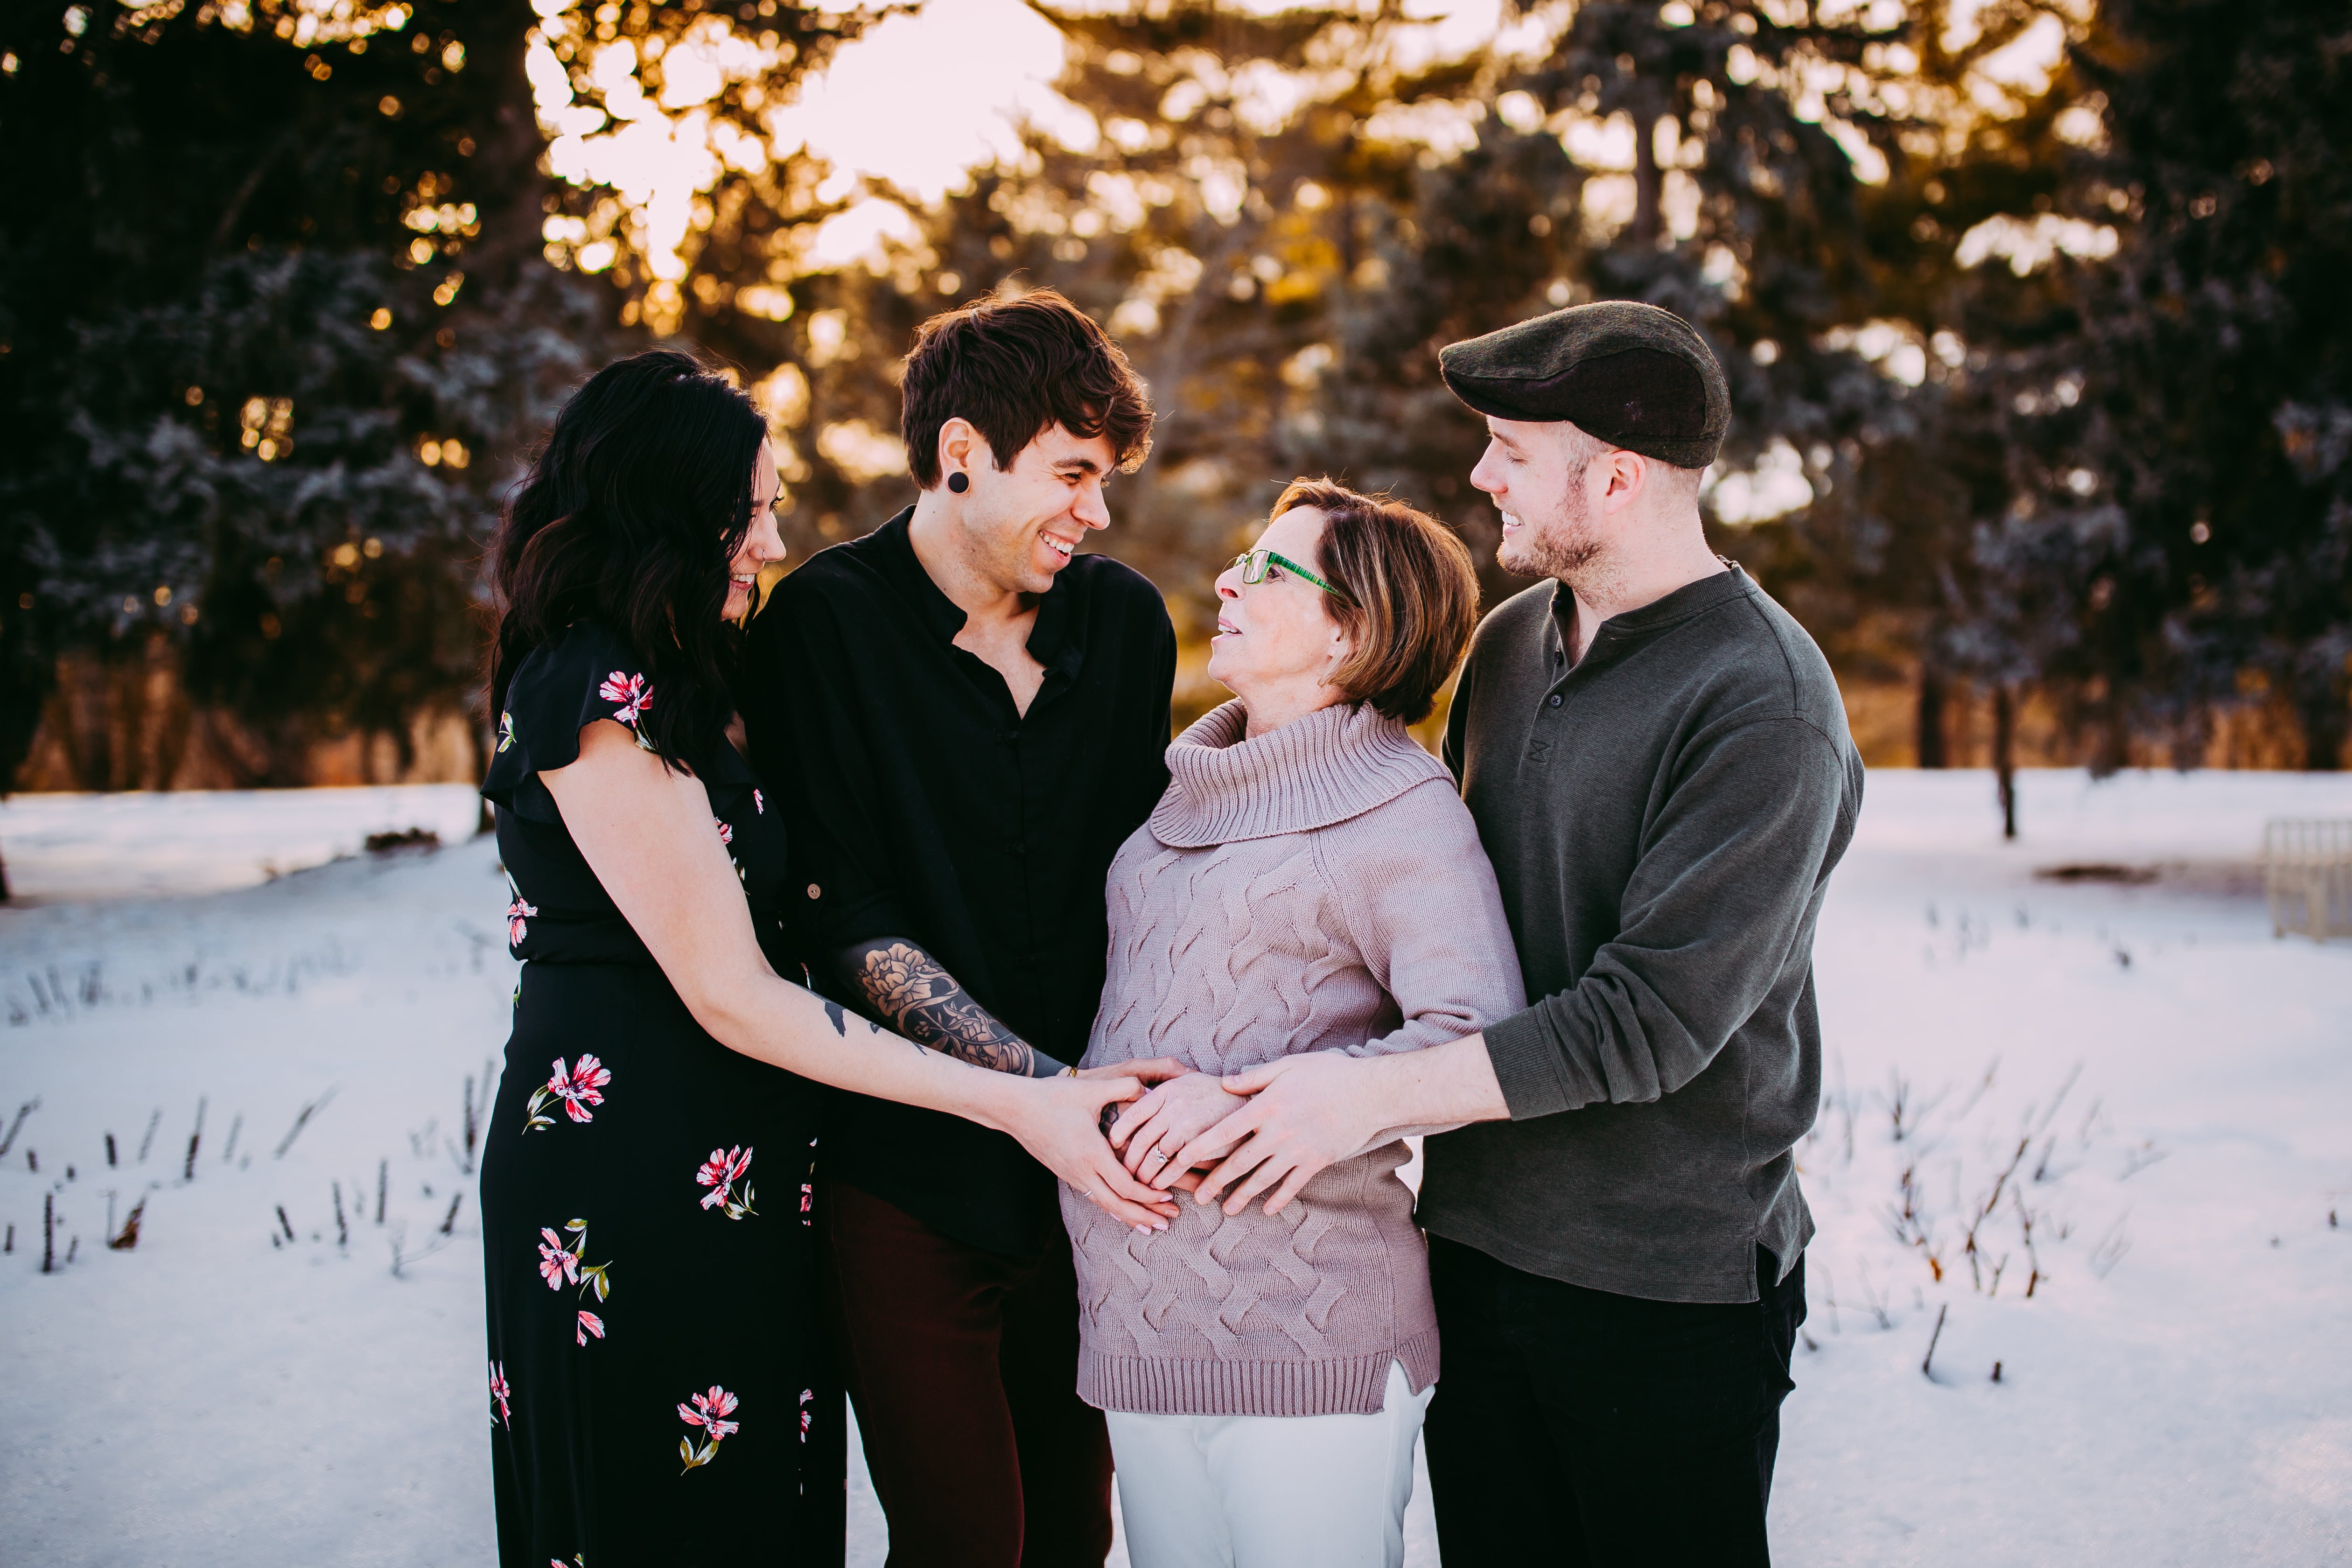 A photo from the maternity shoot for Elliot and Matt with Elliot's sister, who acted as their egg donor, and Matt's mother, who was their gestational surrogate.